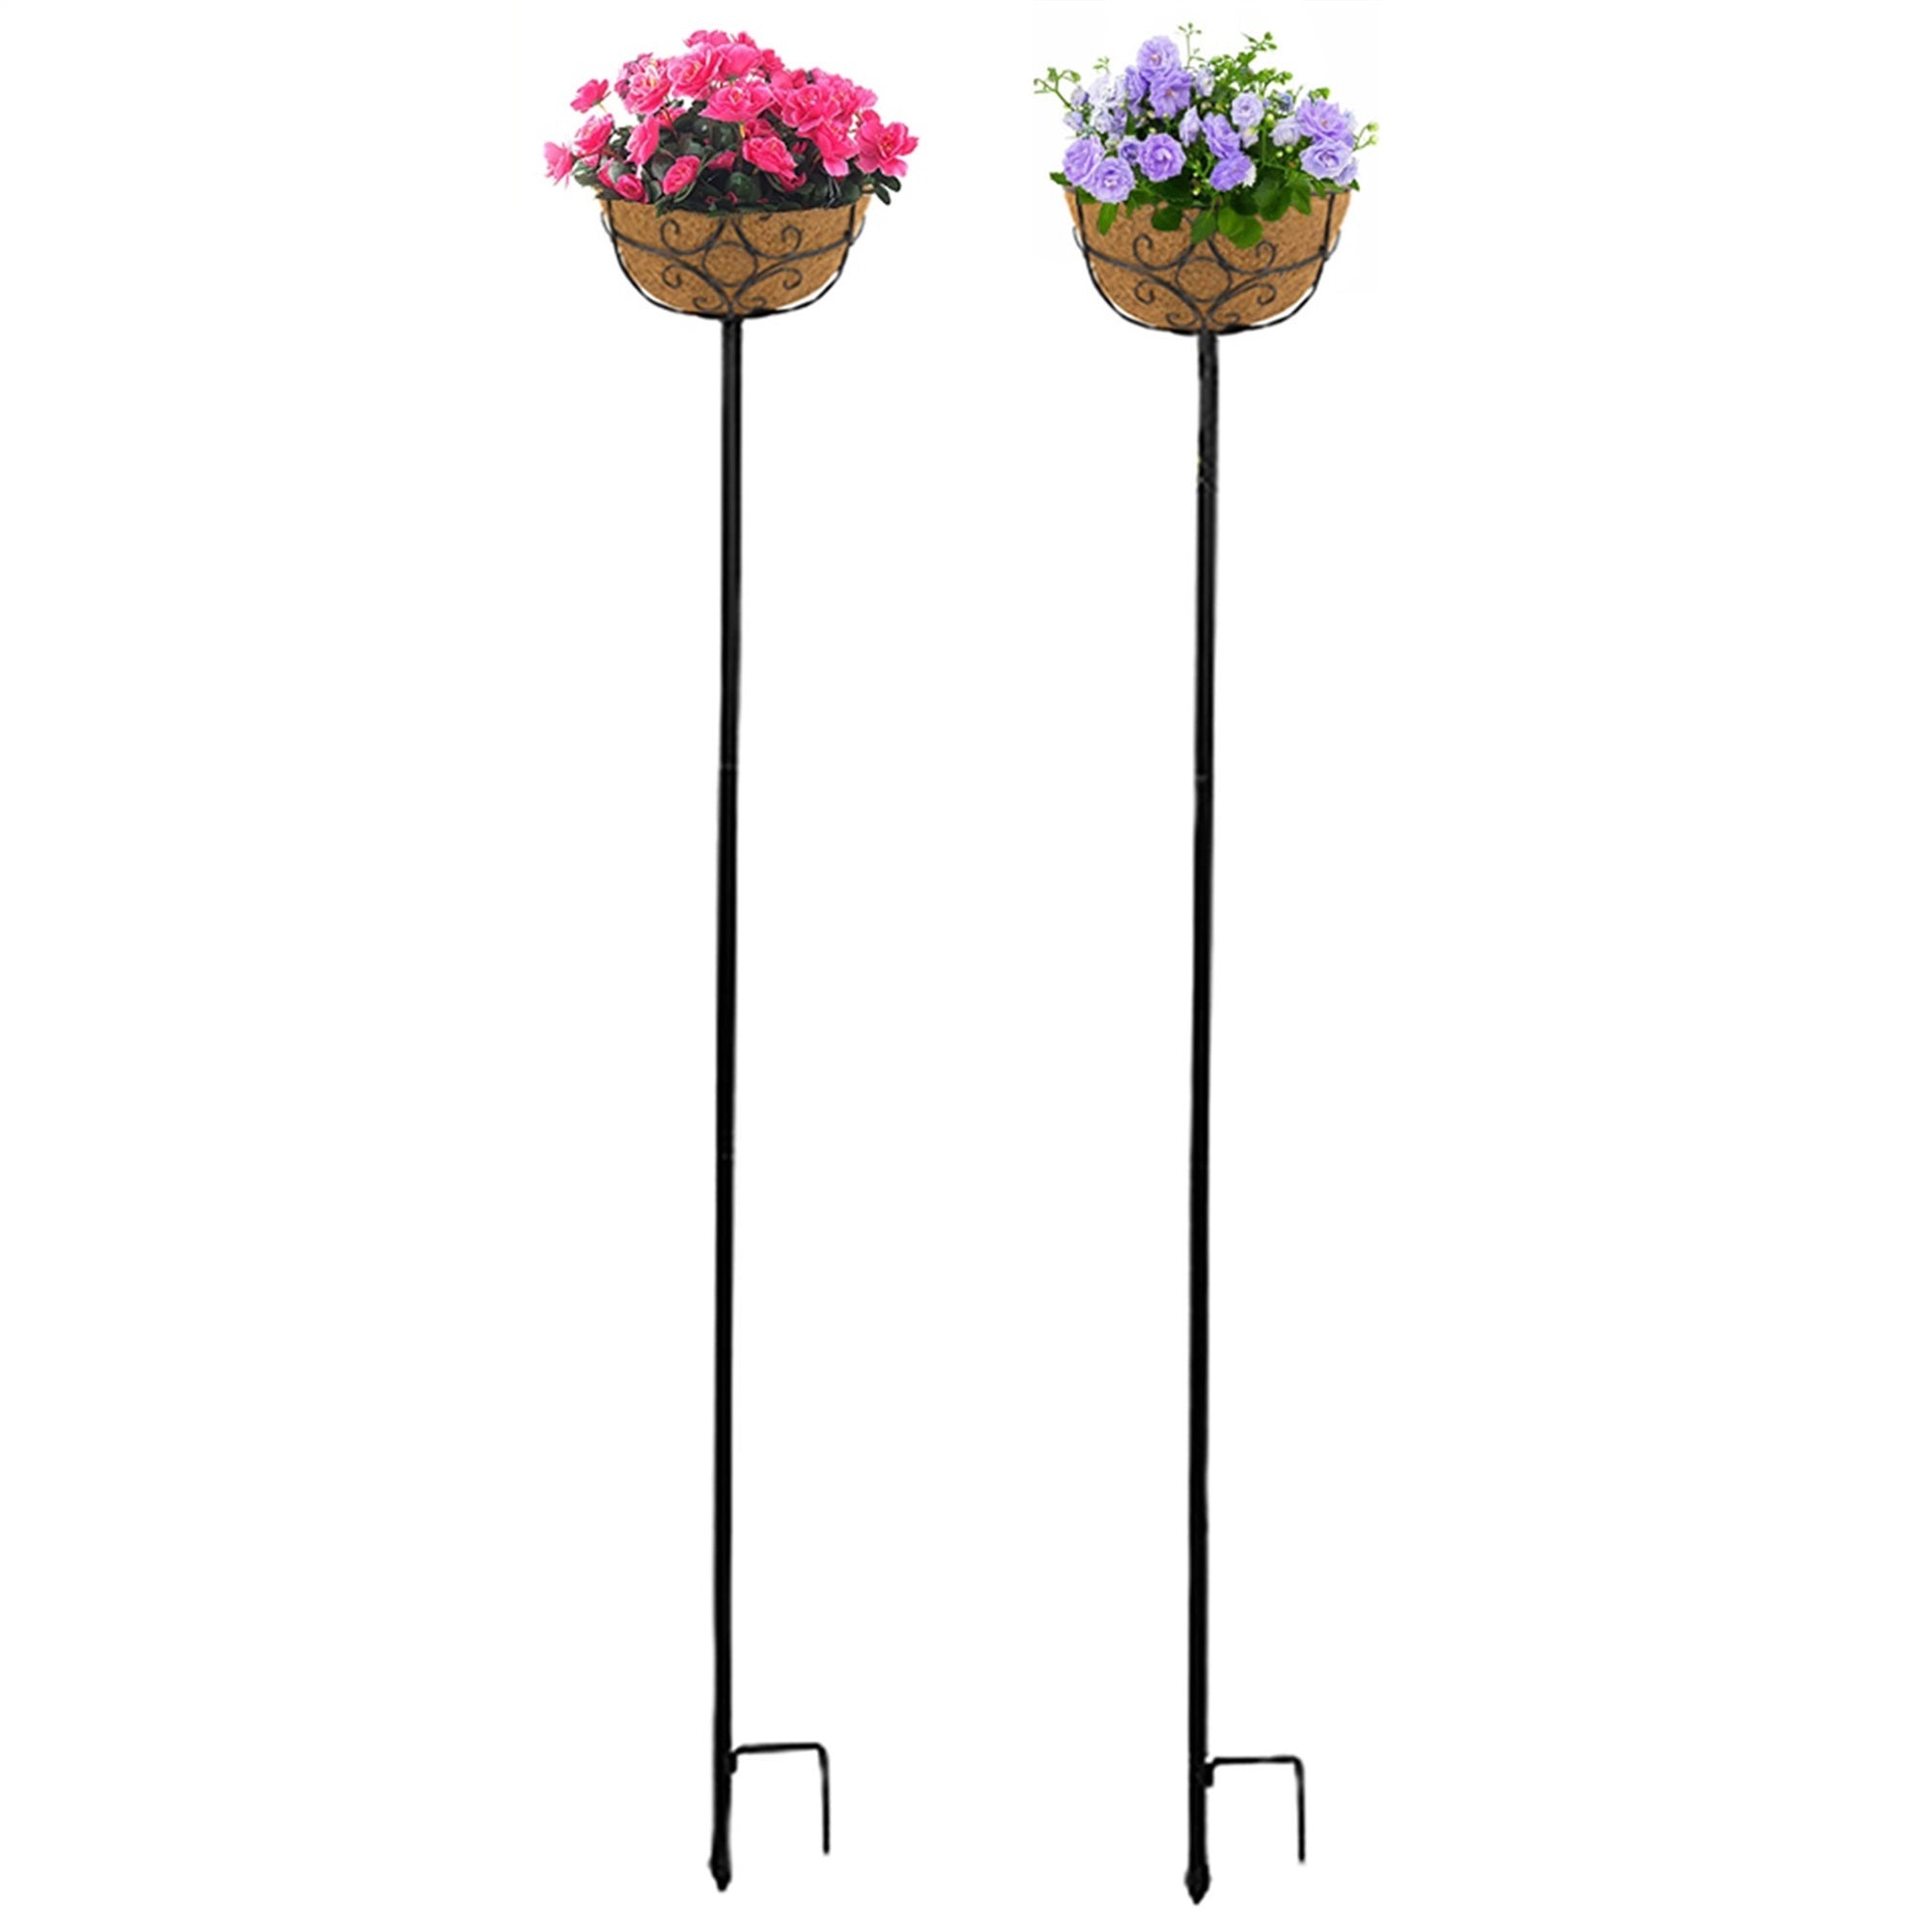 Panacea Black Planter Garden Pole Stake 69 x 10, Black, Coco Liner (Pack of 2)